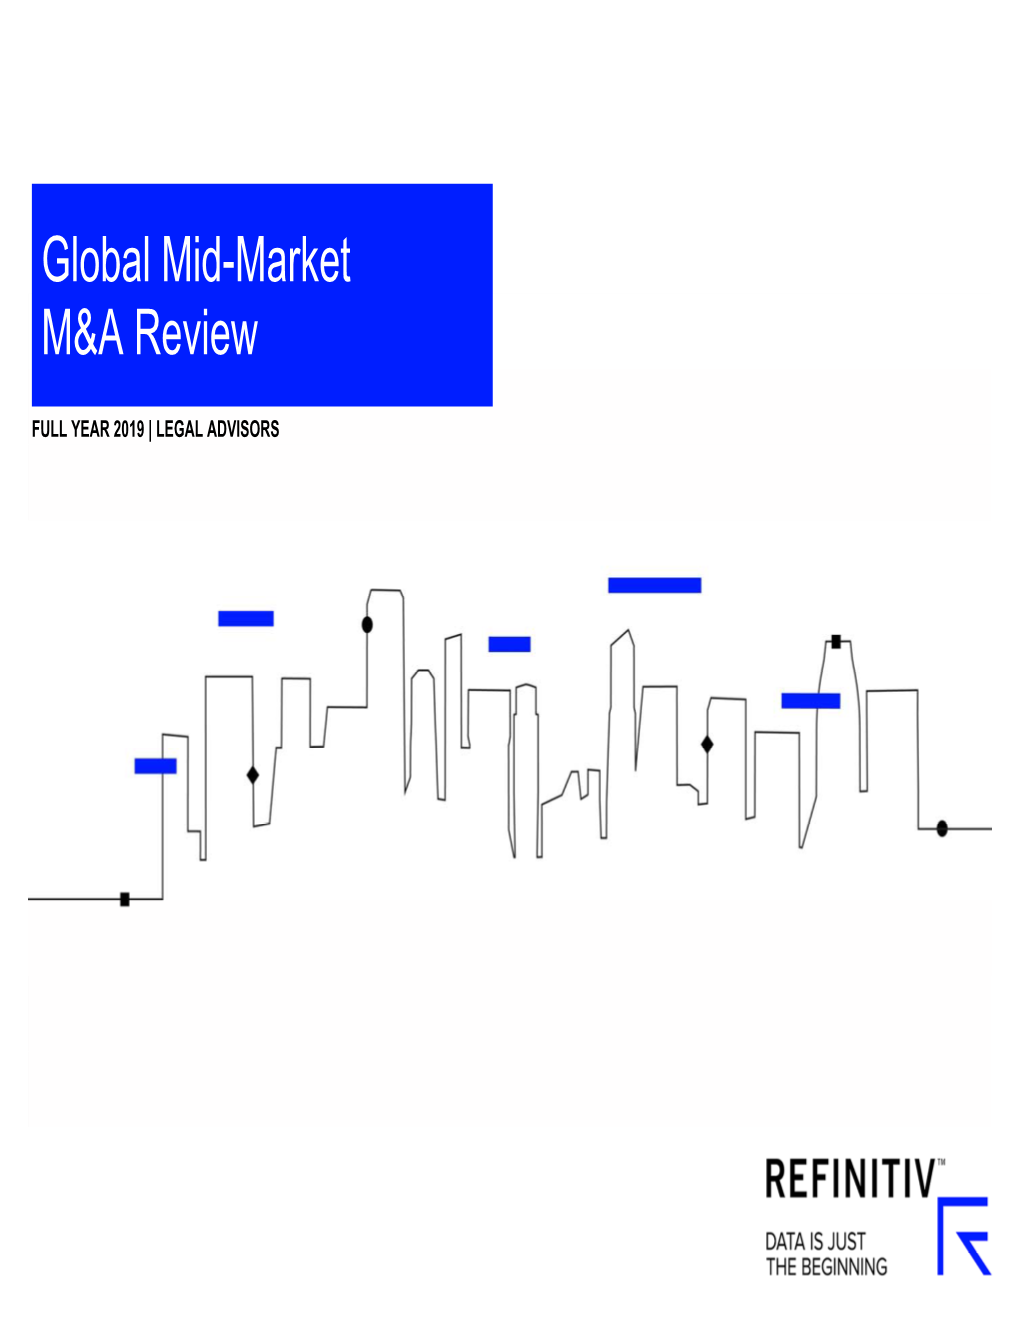 Global Mid-Market M&A Review